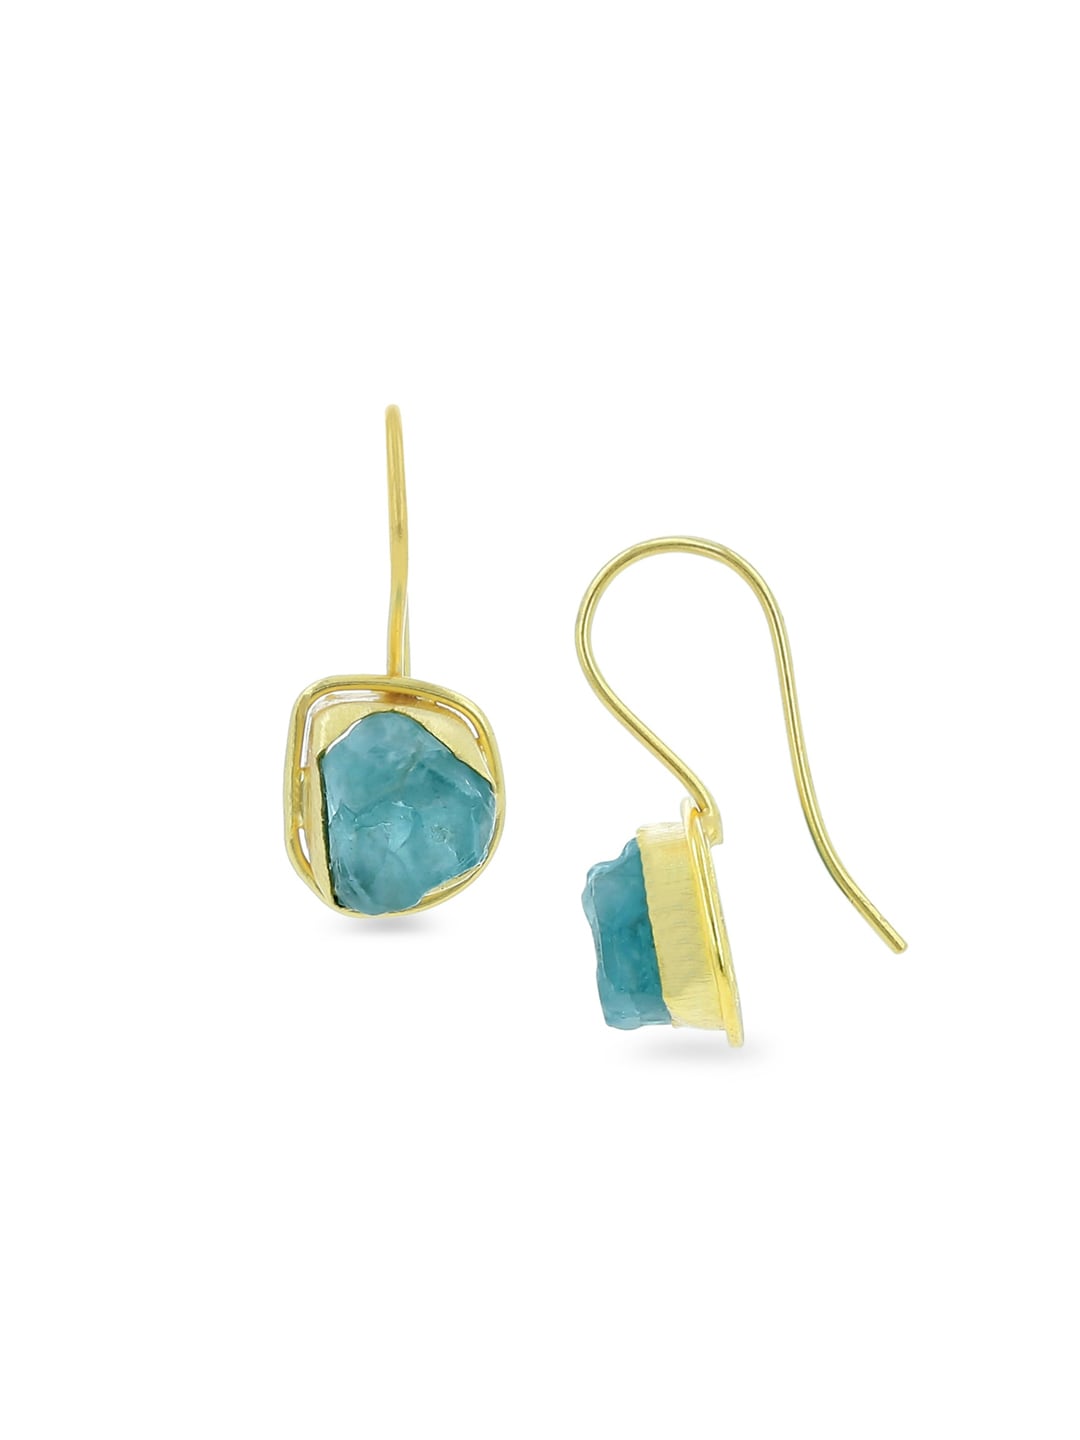 EL REGALO Green Amber Contemporary Drop Earrings - for Women and Girls
Style ID: 17119252